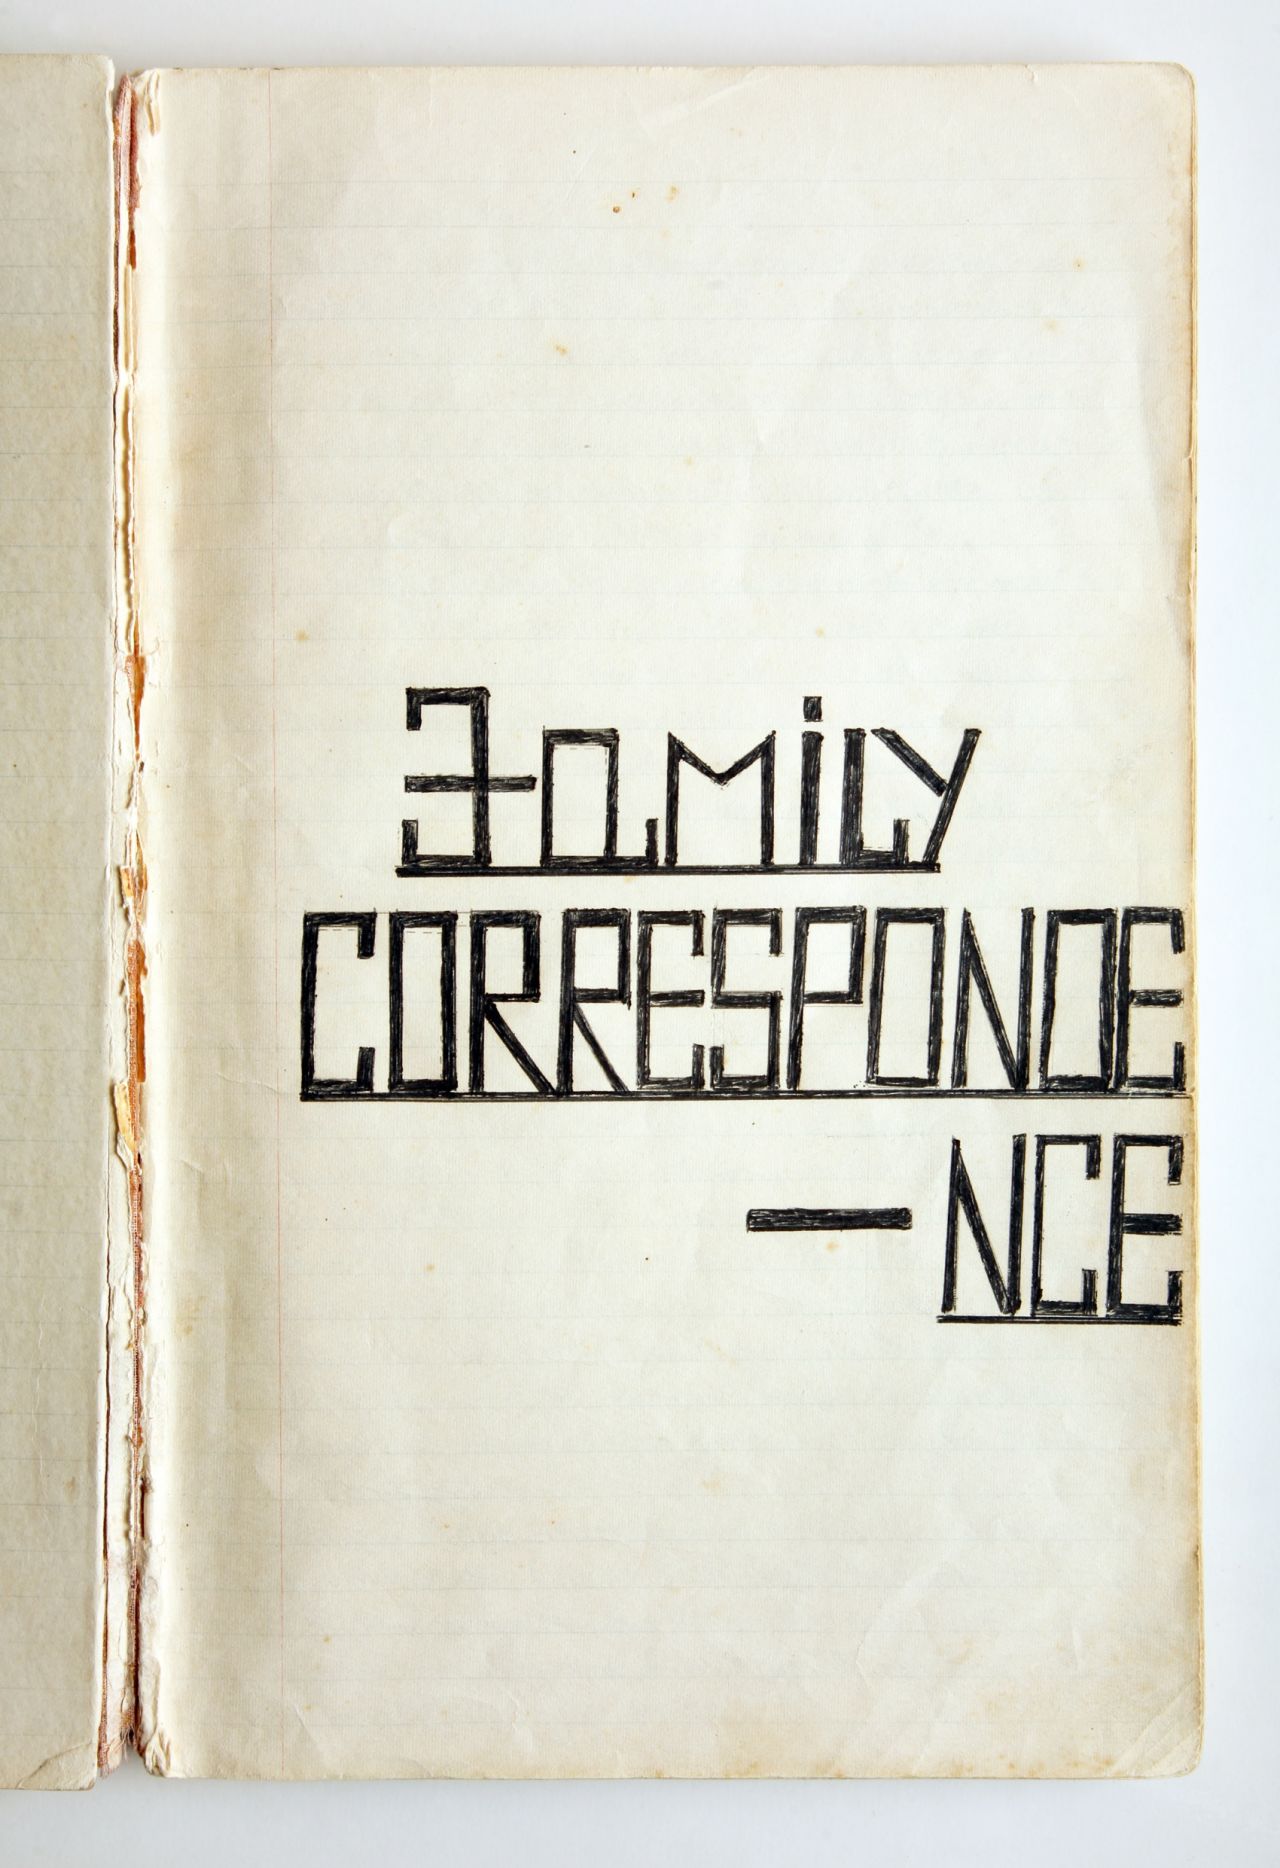 The cover of one of Mandela's prison journals, containing correspondence with his family.